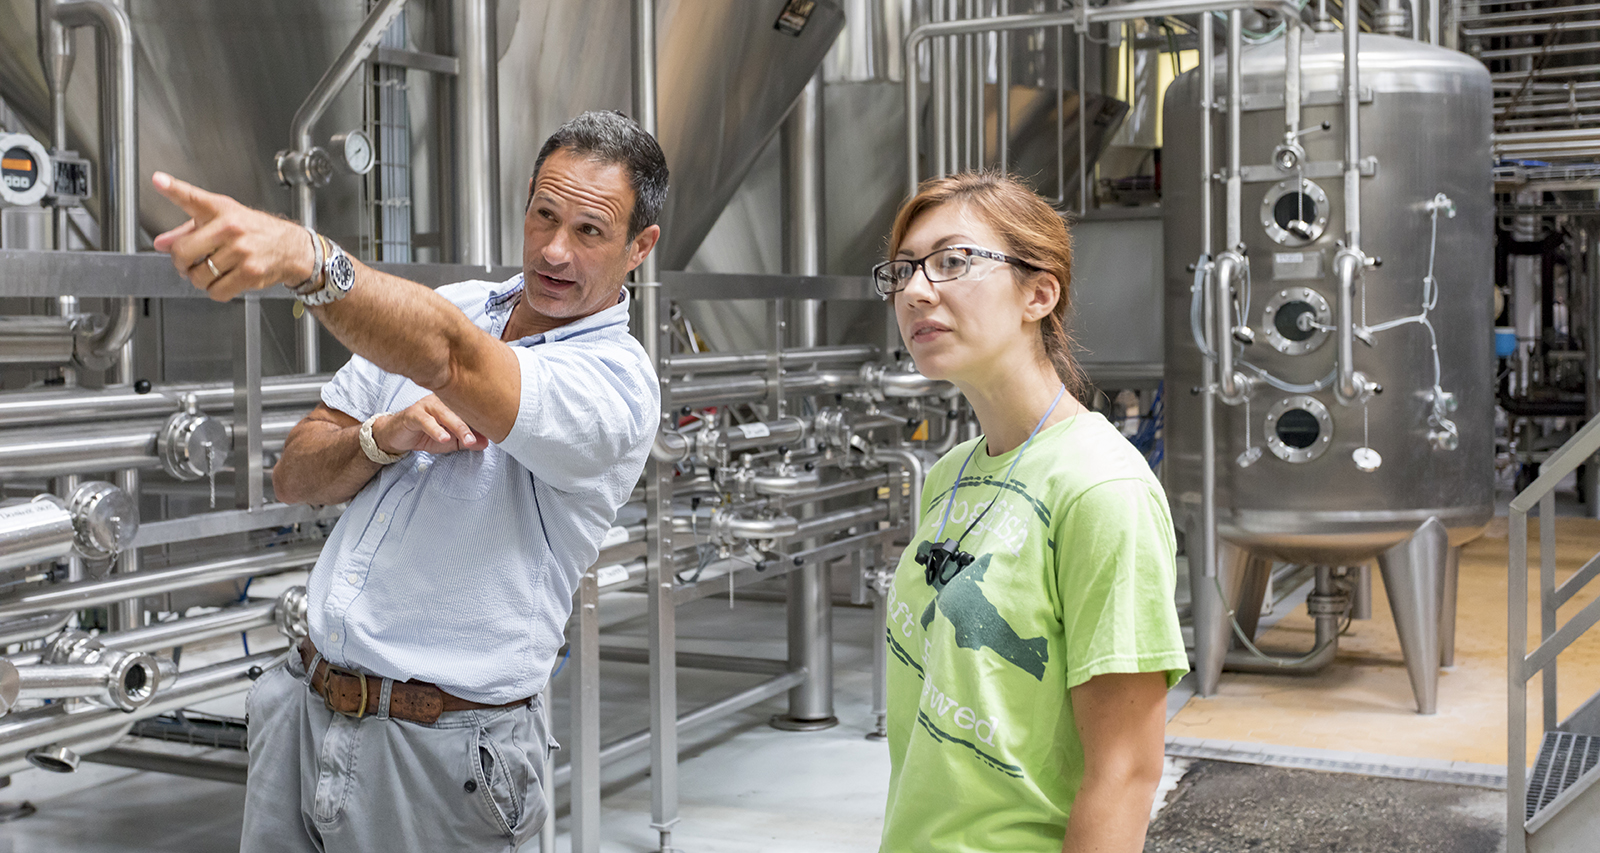 Sam Calagione '92 with brewer at Dogfish Head brewery.